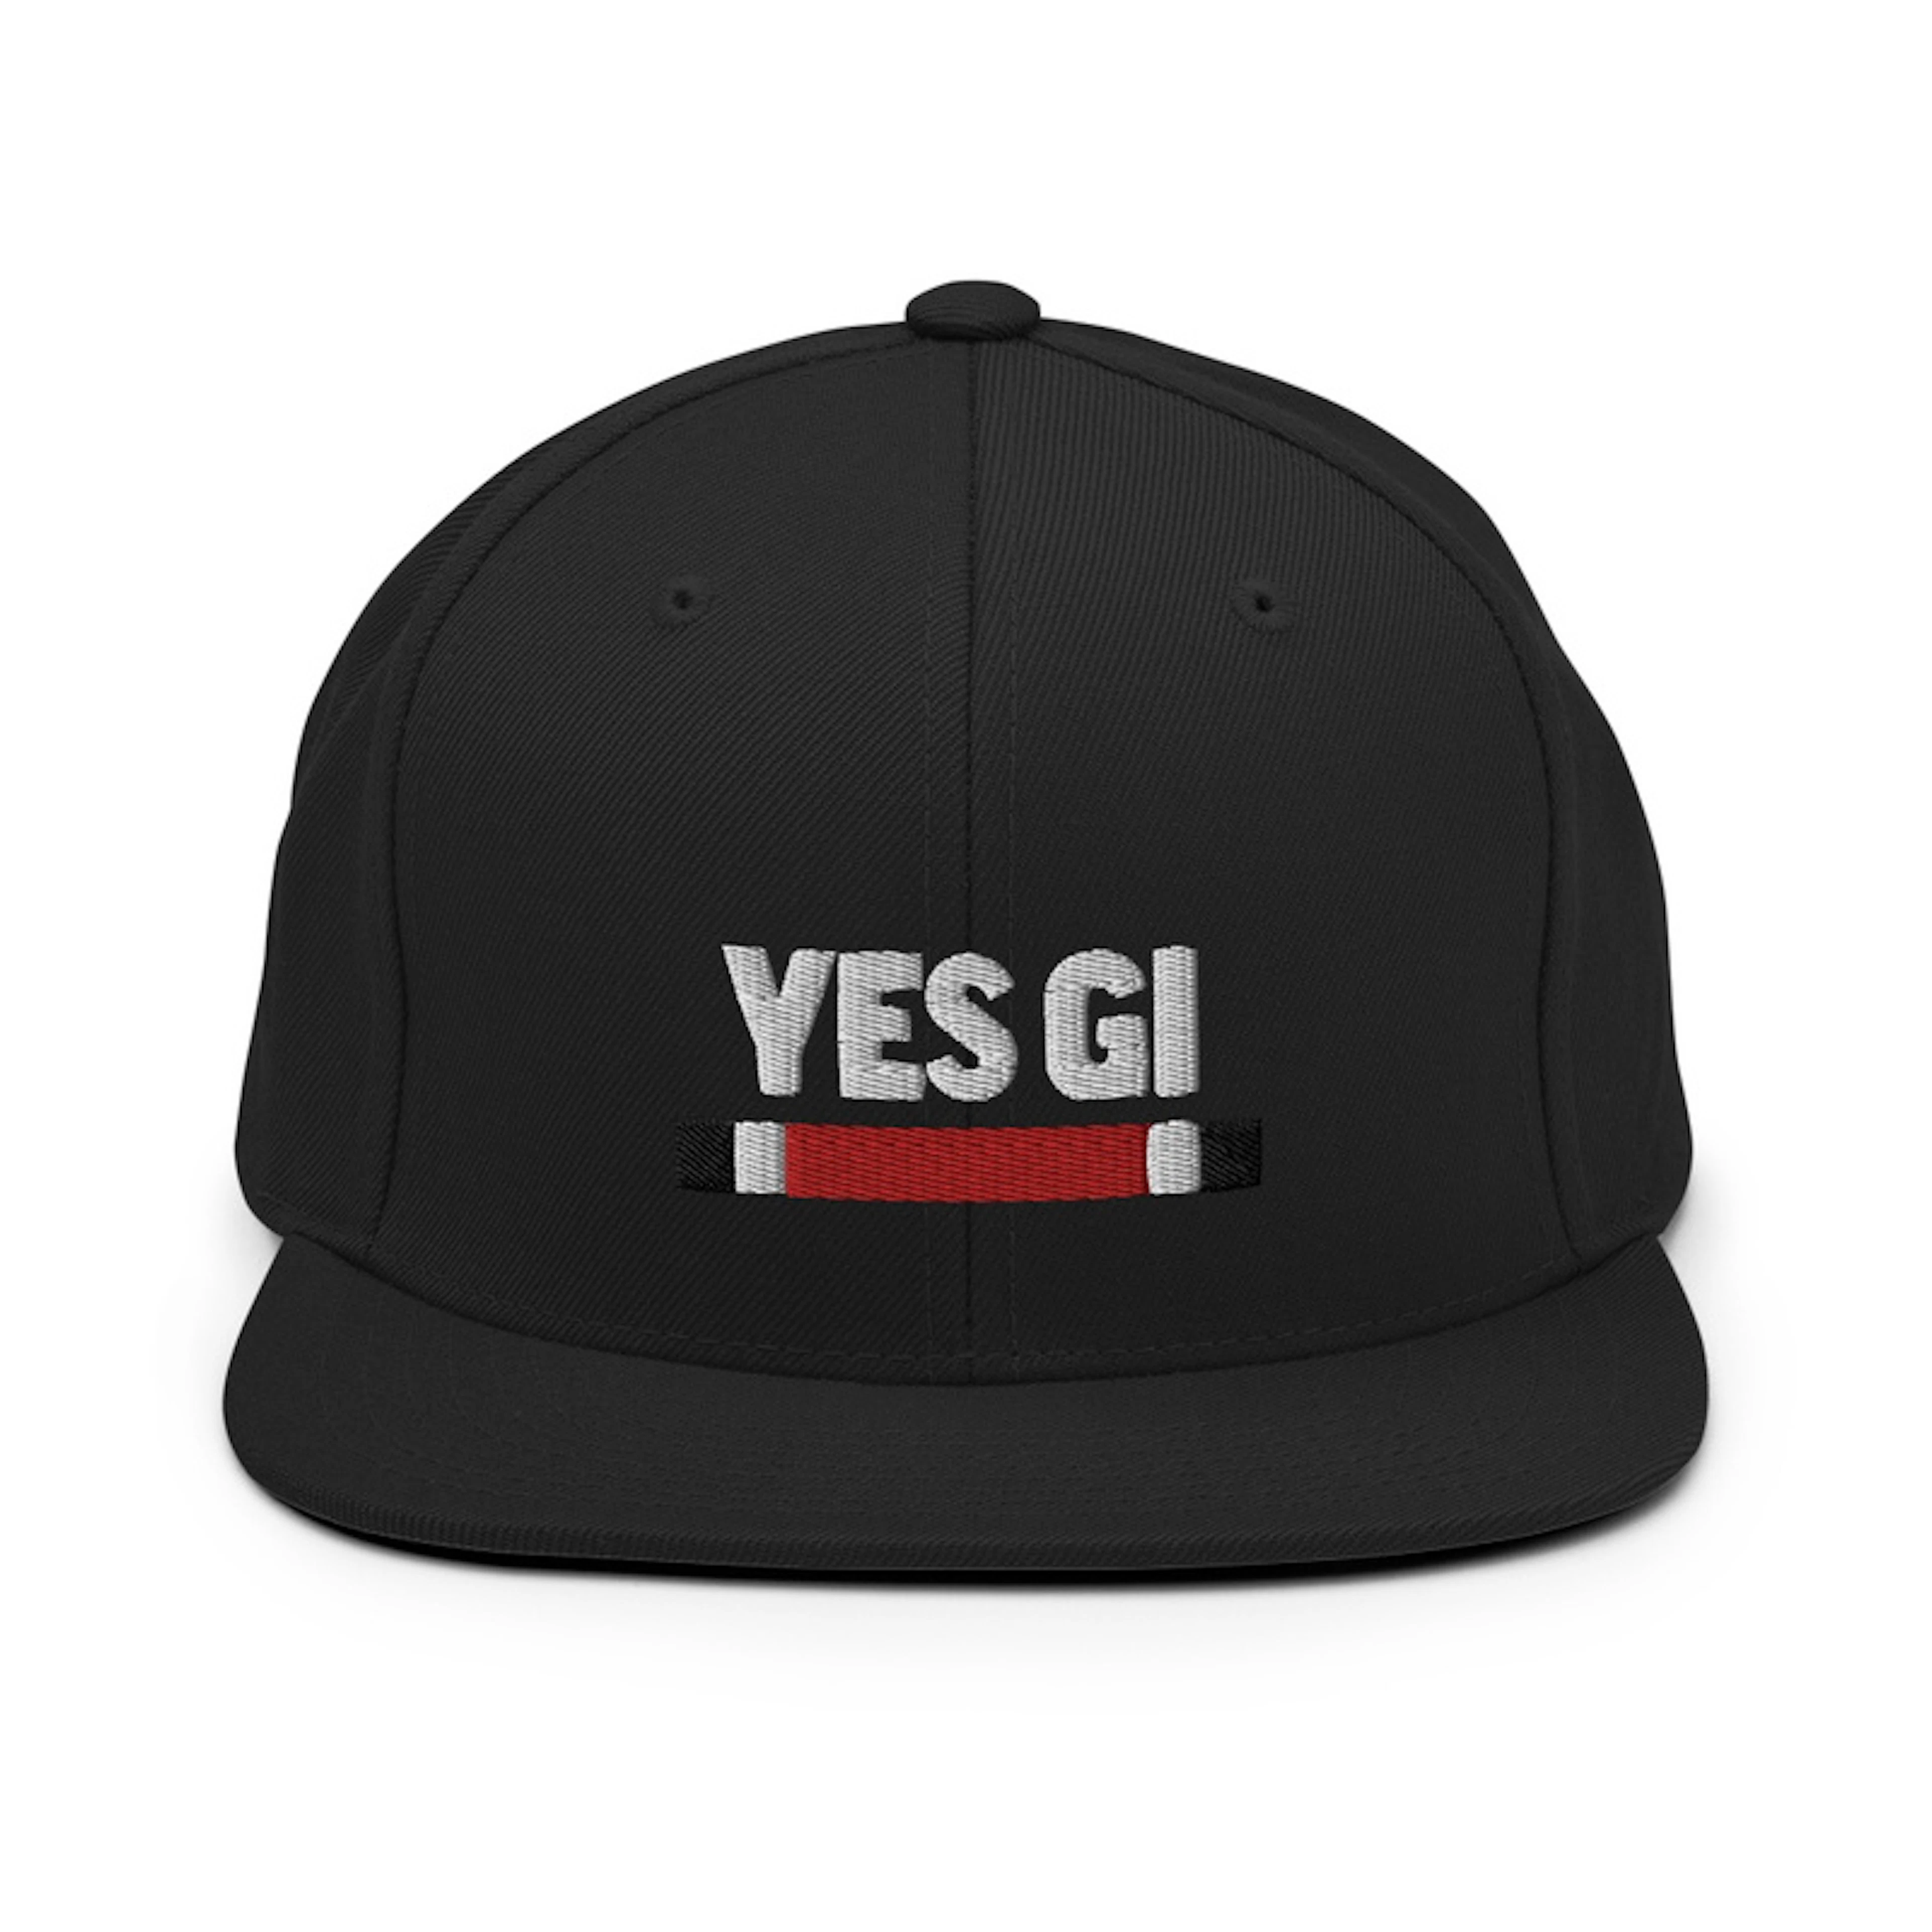 Yes Gi Hats/Apparel (click to see all)